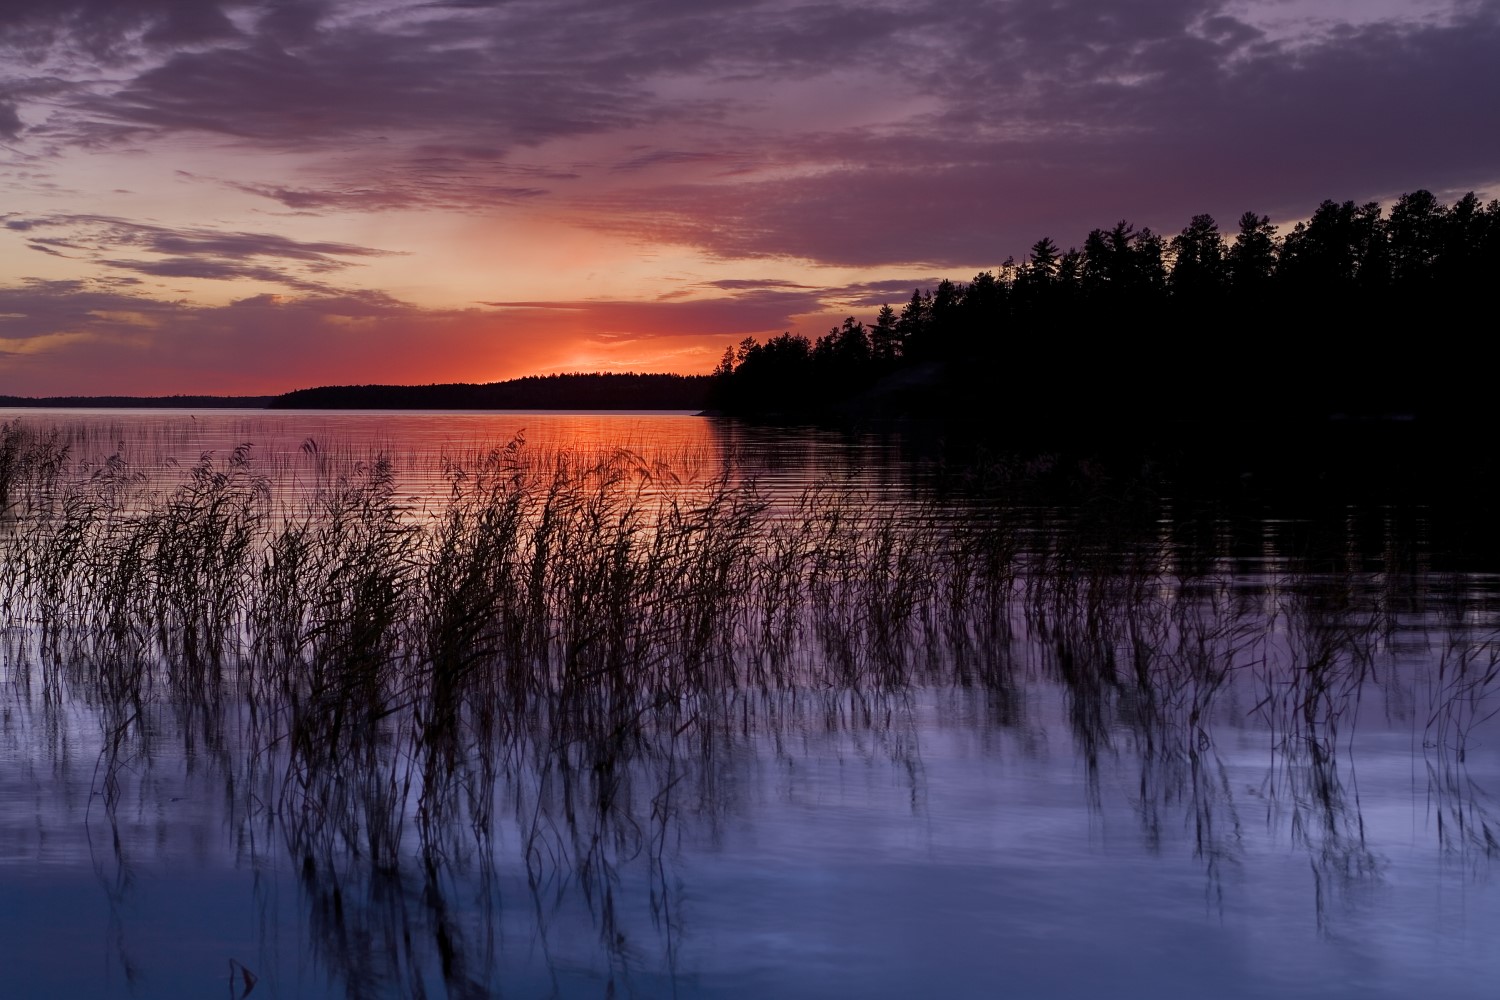 An indigo lake with reeds in the foreground. In the distance, the sun is setting, turning the sky orange, mauve and purple. The silhouette of a coastline is on the right.